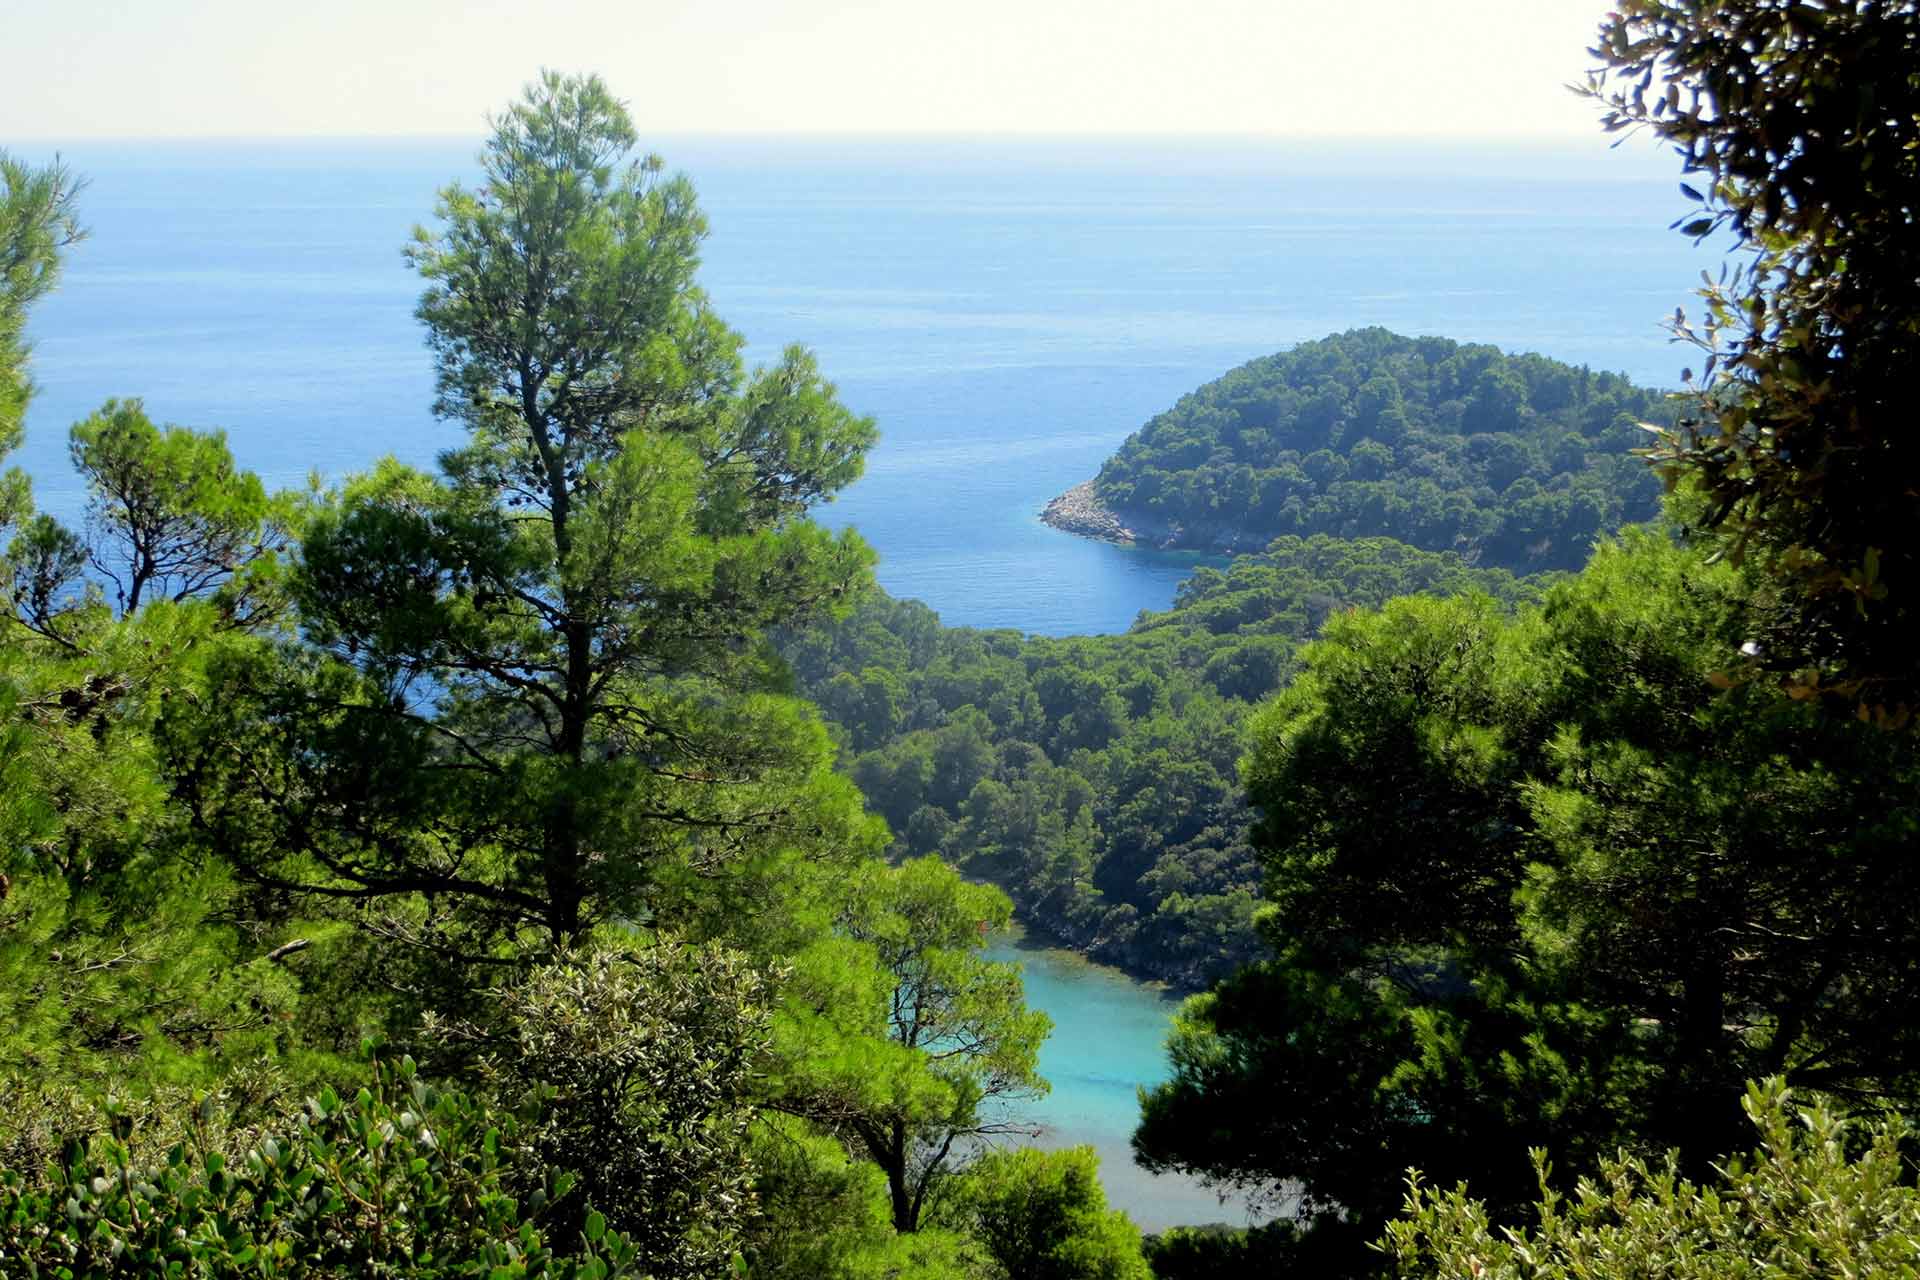 Our impact in Mljet